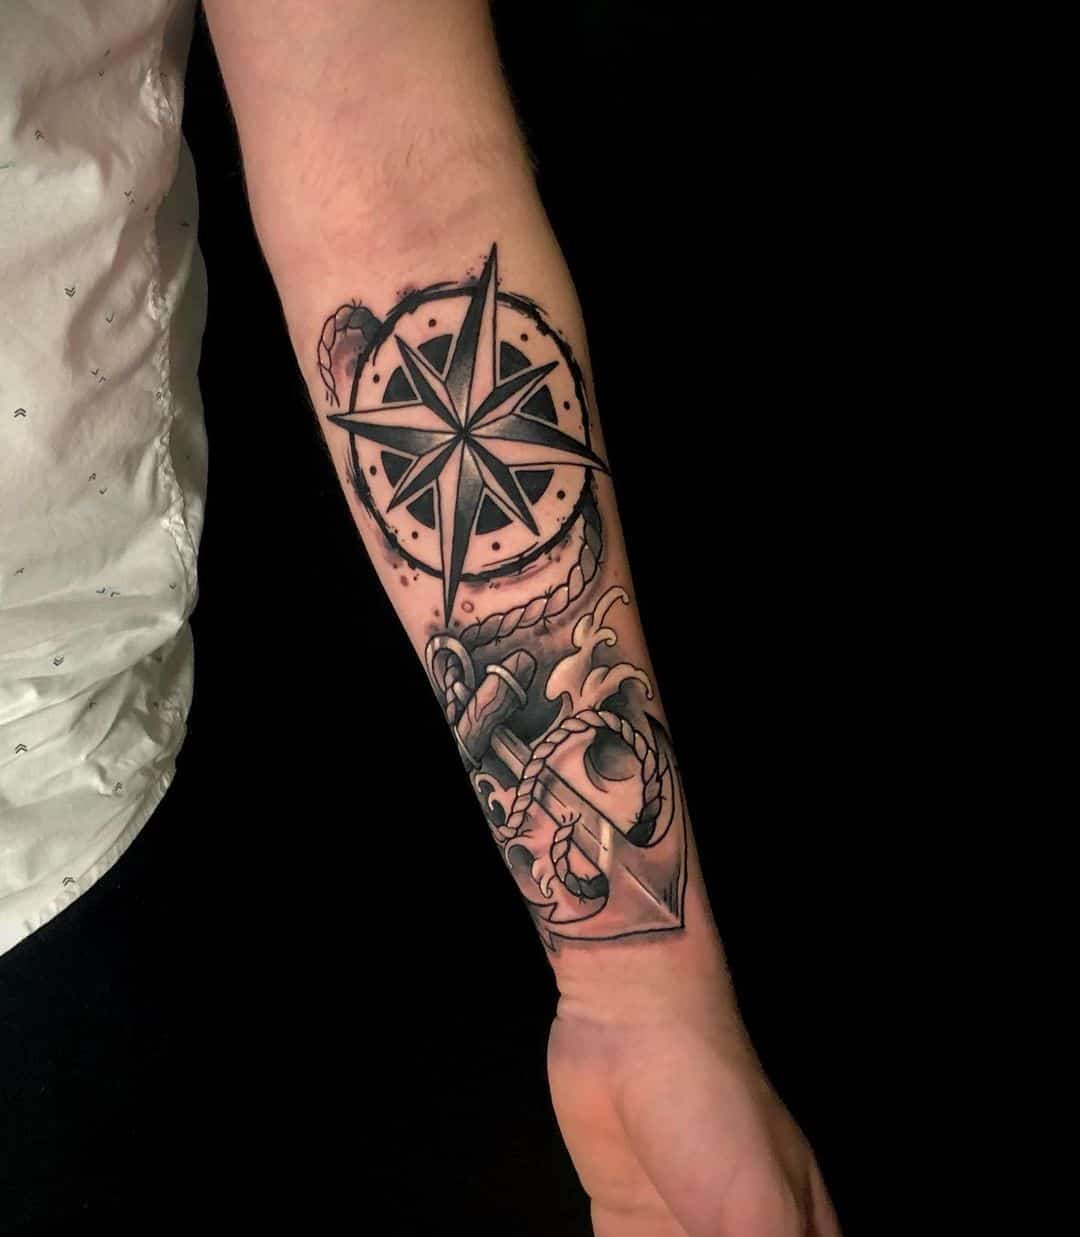 Tattoo Villa - One of the classic nautical tattoo combinations is an anchor  and compass. Traditionally, anchors symbolize home, safety, and hope.  Compass represents the guiding and grounding forces in your life. . .